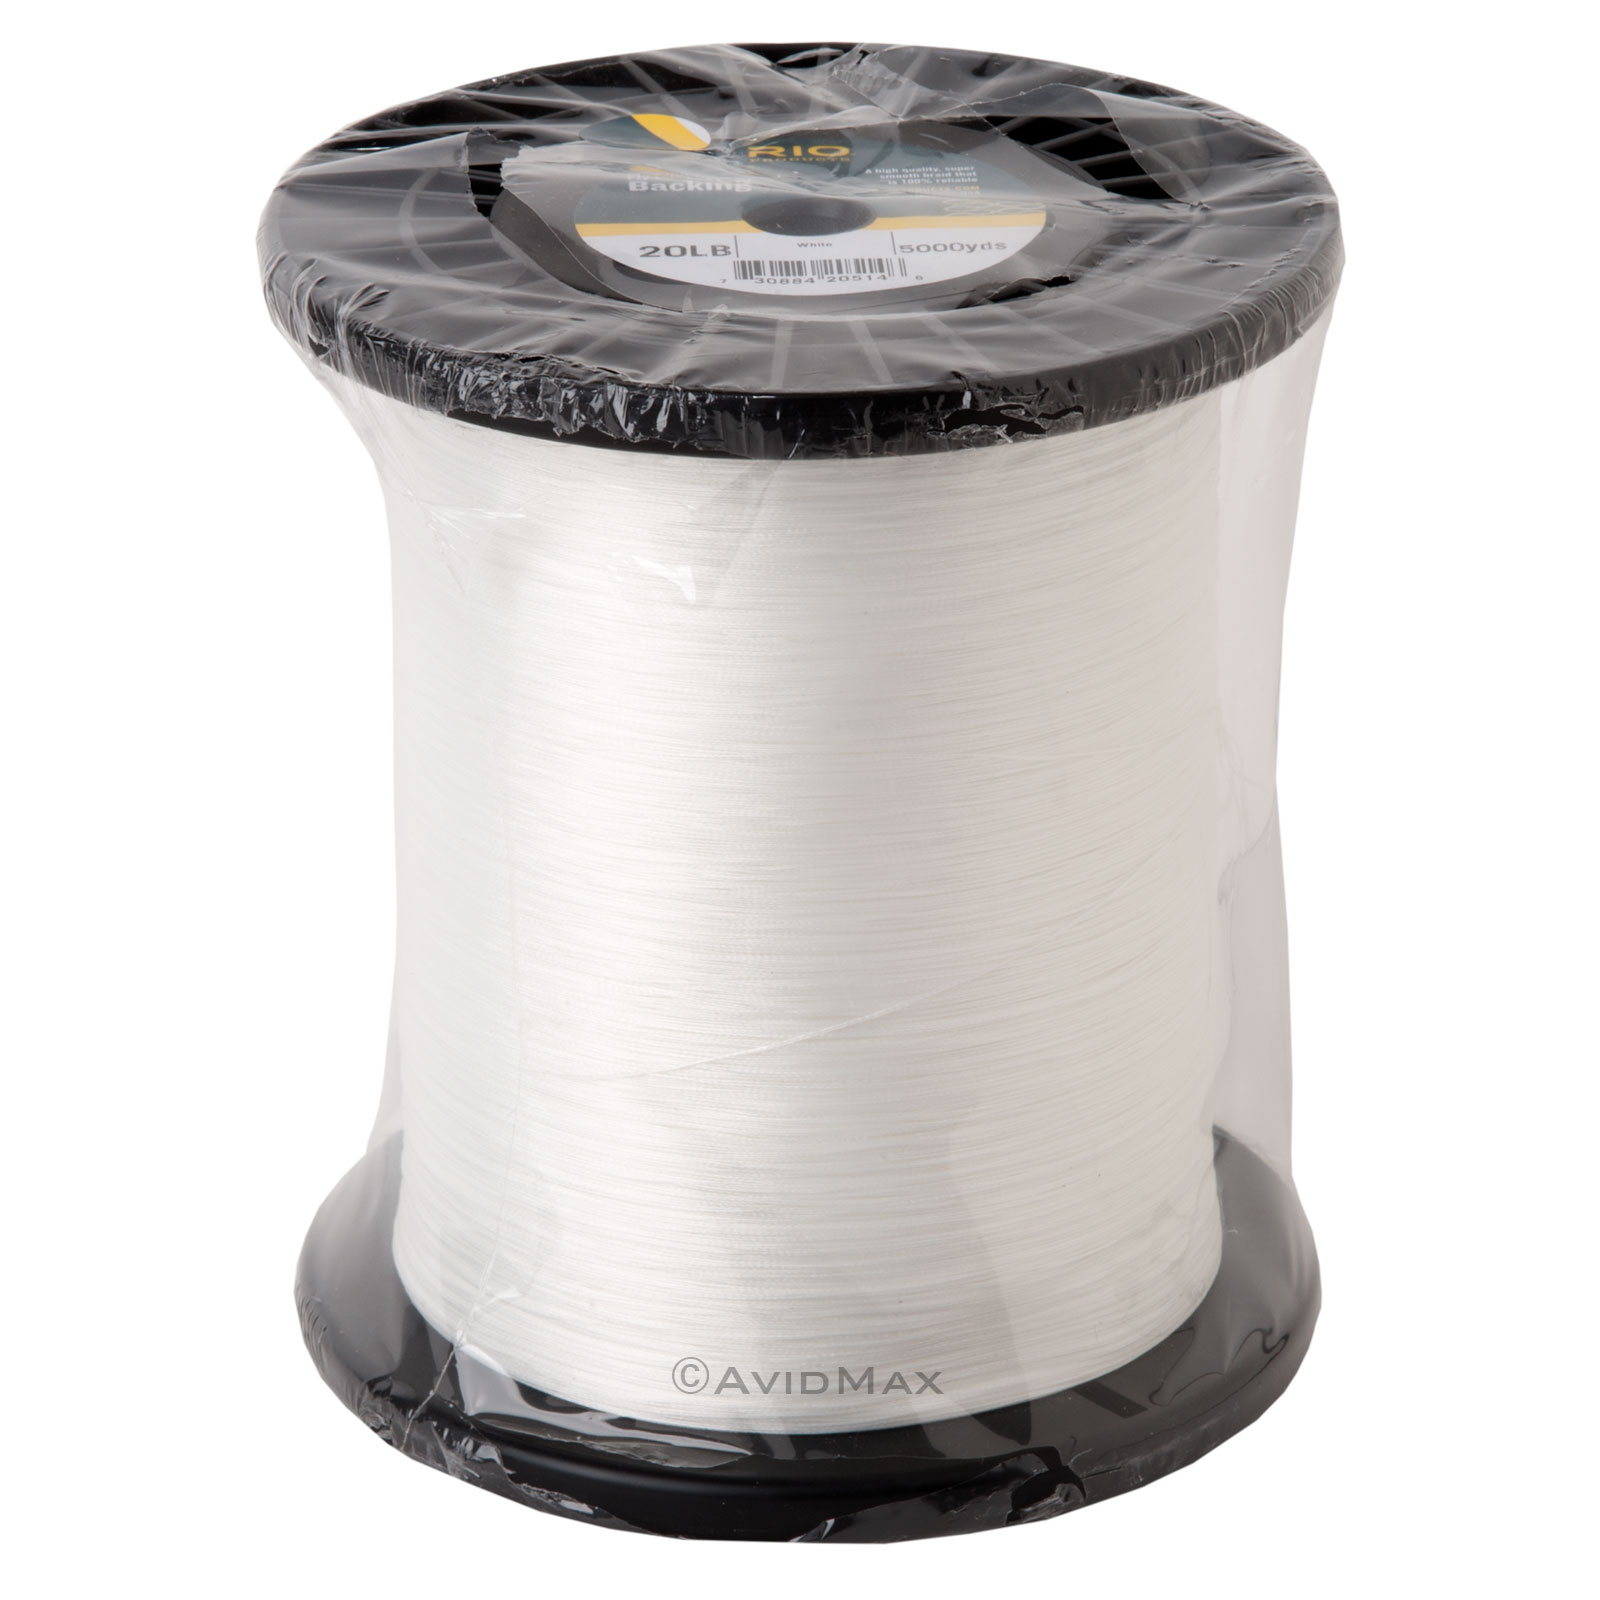 Snowbee Braided Dacron Backing Line - 20lb - 1250m, Backing Lines